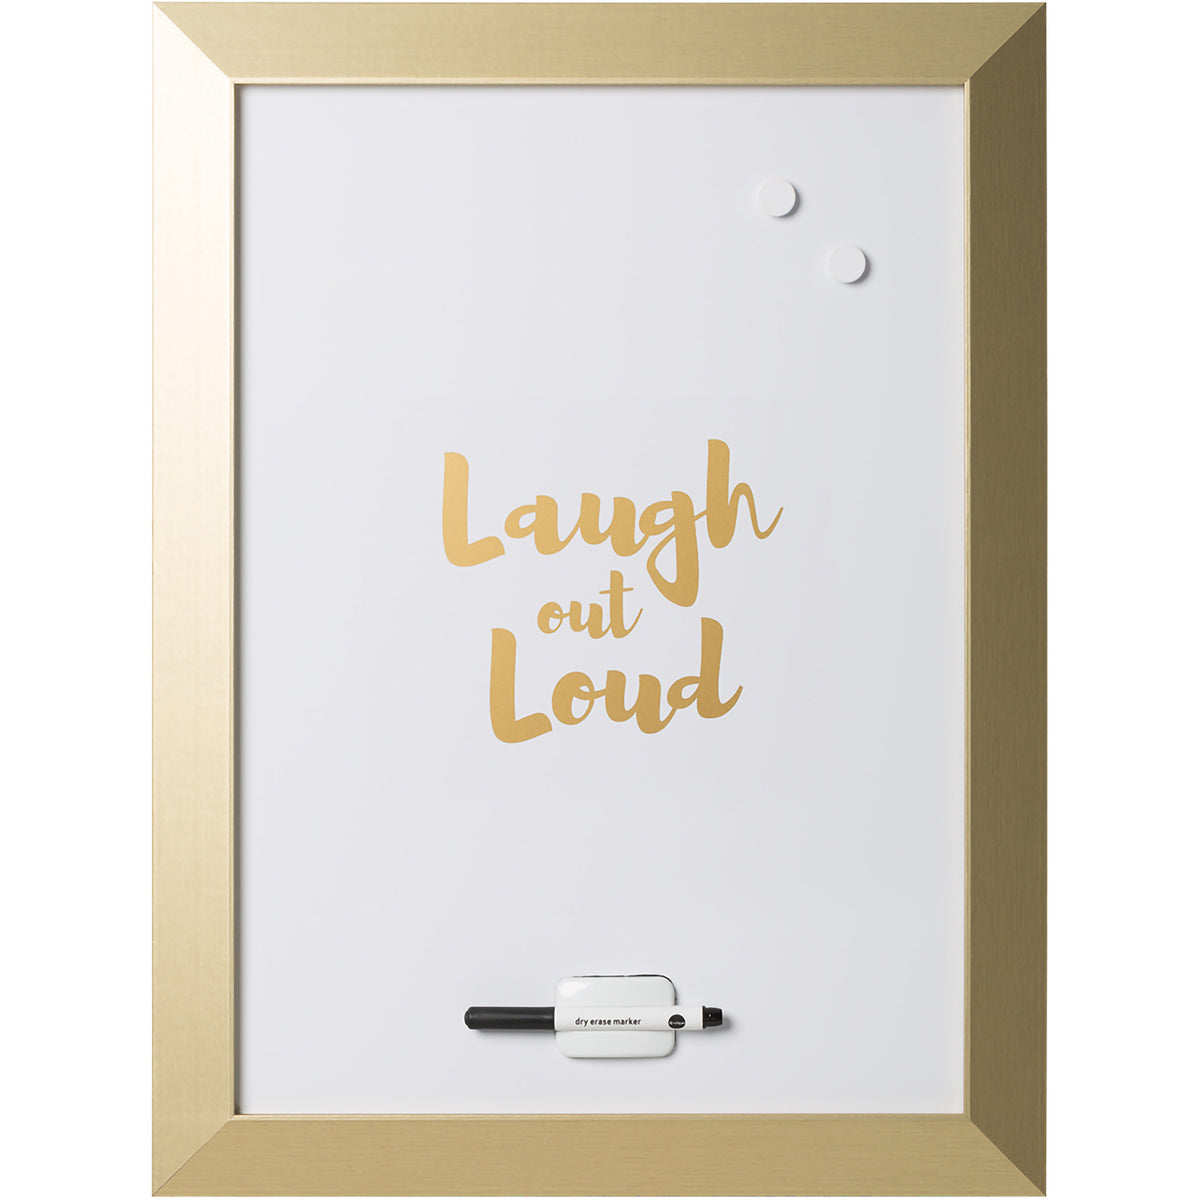 MM04444612 Kamashi "Laugh out Loud" Quote Dry Erase Magnetic Personal White Board + Accessories, Home Wall Decor, 24" x 18", Gold Wood Frame by MasterVision